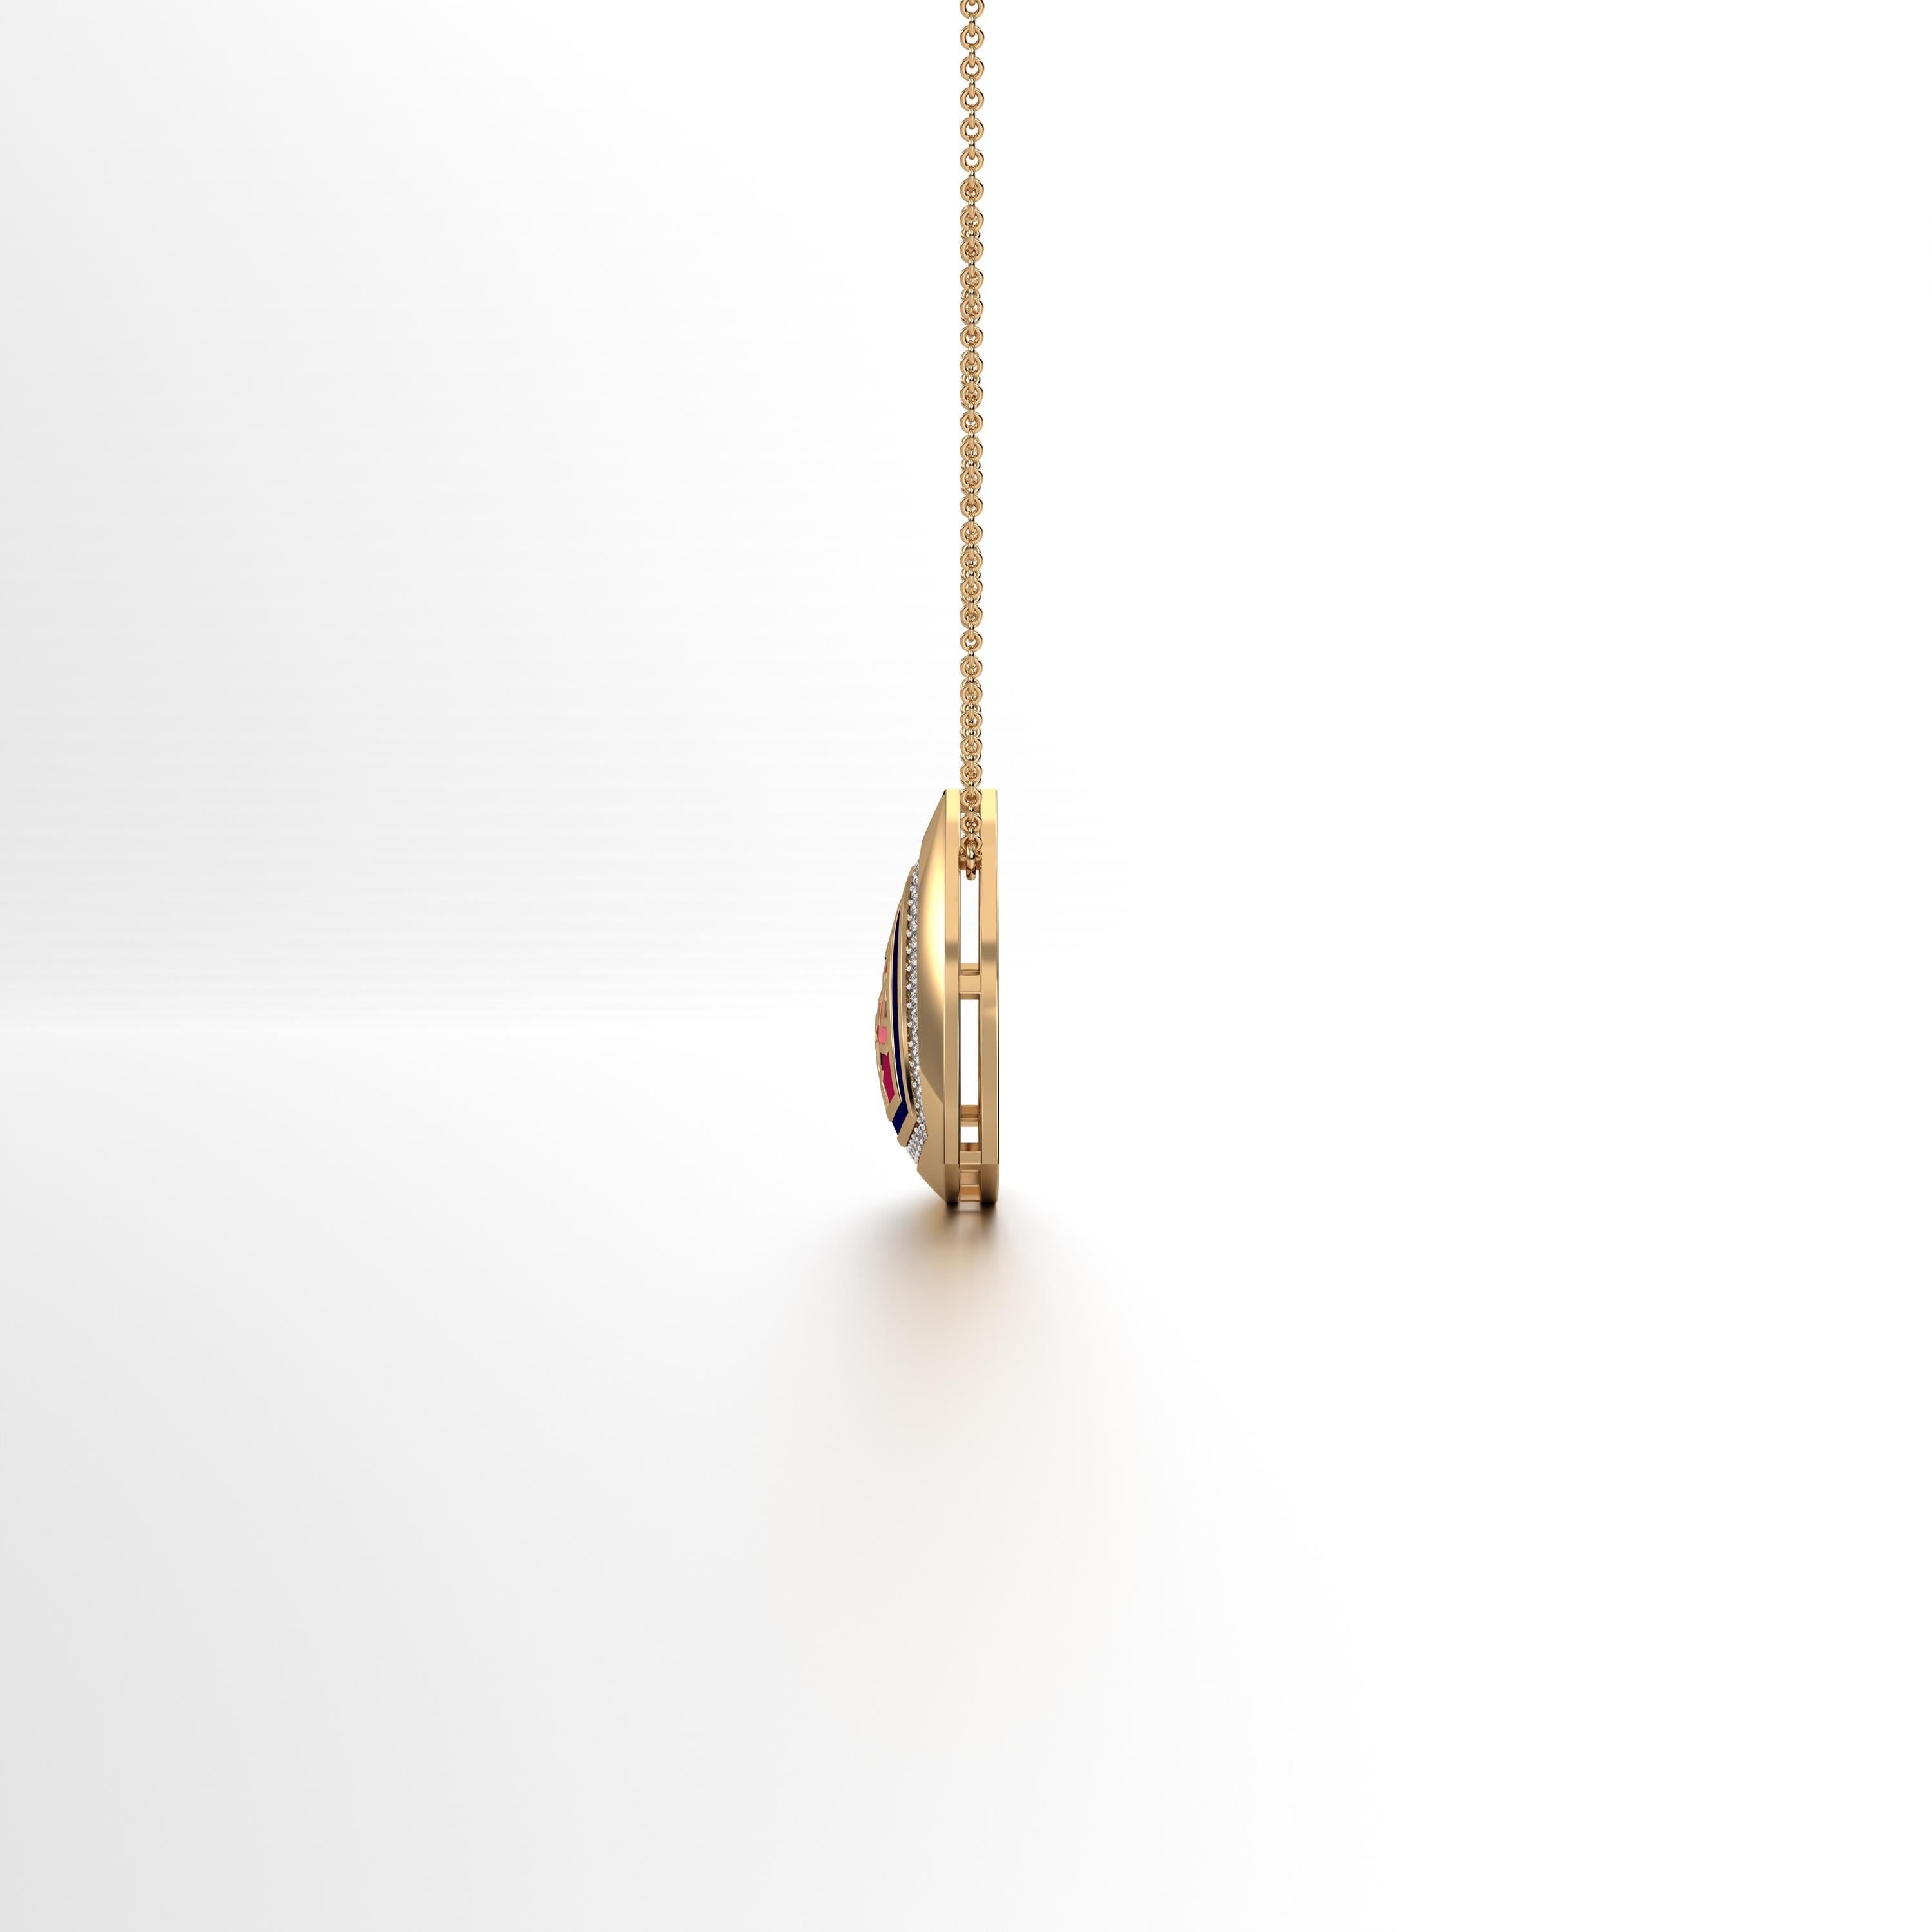 Aynur Trillion Pendant with Attached Chain Medium